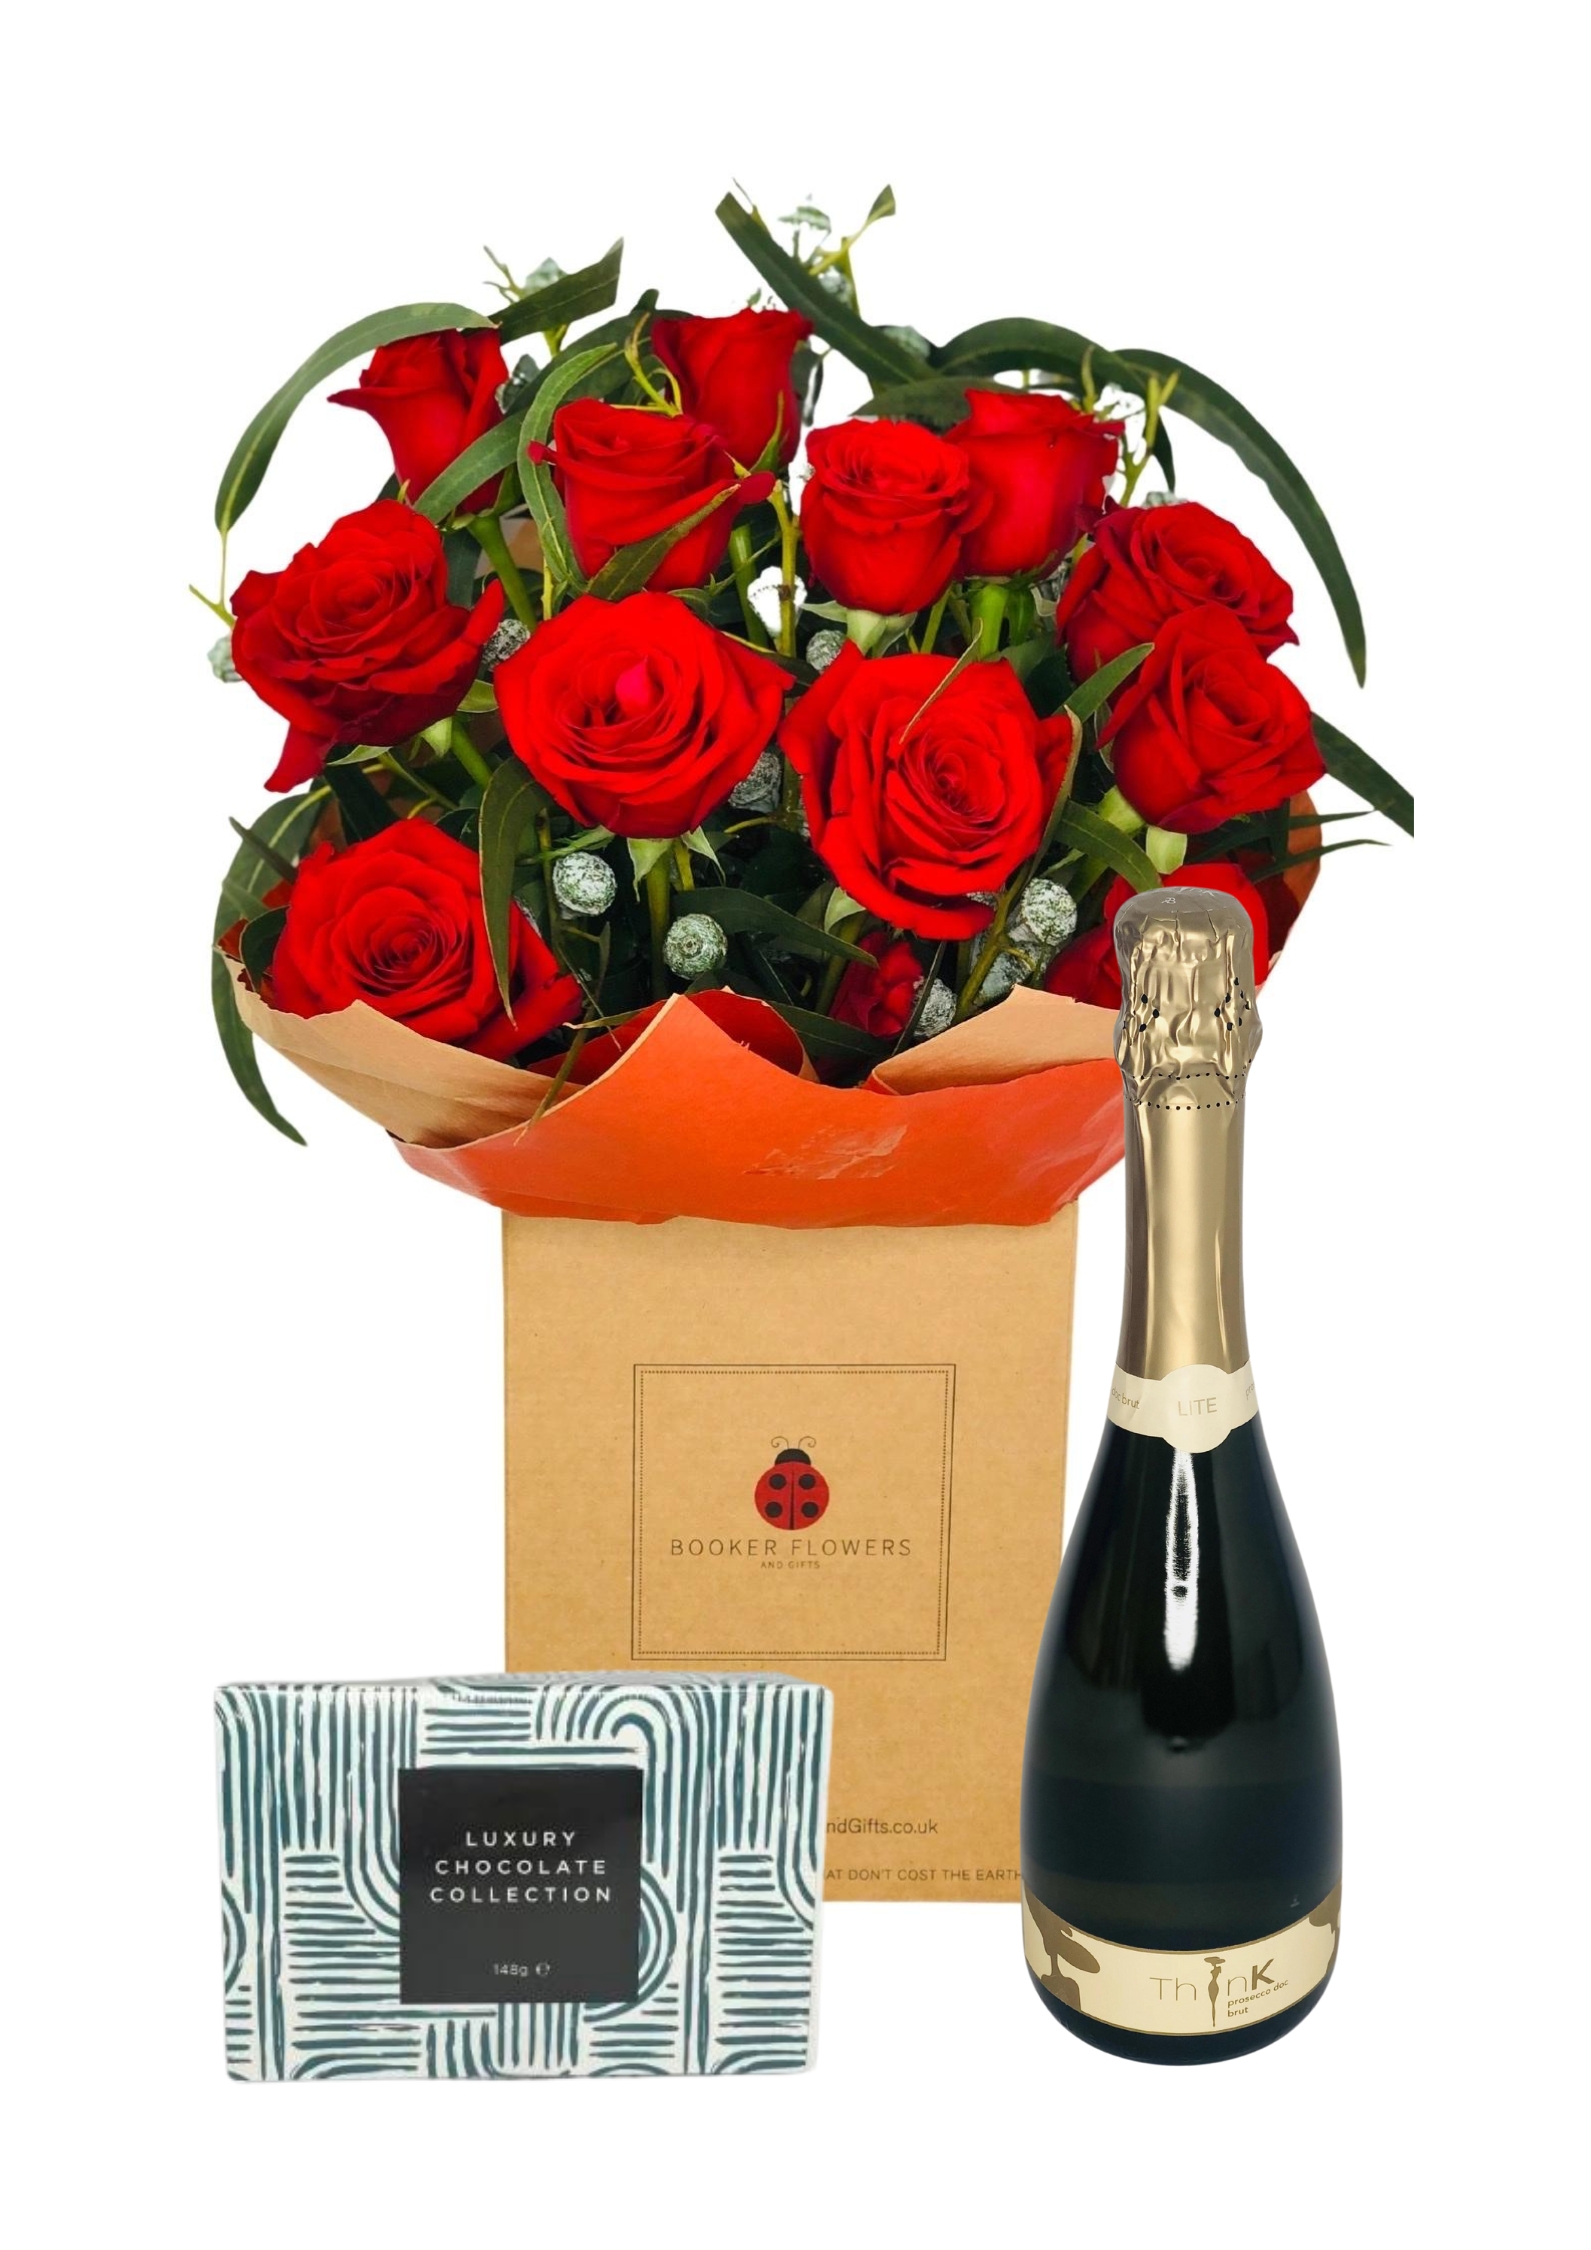 <h2>12 Red Roses with Chocolates and Prosecco - Gift Set</h2>
<br>
<ul>
<li>Romantic Gift Set</li>
<li>Approximate Dimensions of Bouquet: 50cm x 40cm</li>
<li>Flowers arranged by hand and gift wrapped in our signature eco-friendly packaging and finished off with a hidden wooden ladybird</li>
<li>To give you the best occasionally we may make substitutes</li>
<li>Our flowers backed by our 7 days freshness guarantee</li>
<li>For delivery area coverage see below</li>
</ul>
<br>
<h2>Flower Delivery Coverage</h2>
<p>Our shop delivers flowers to the following Liverpool postcodes L1 L2 L3 L4 L5 L6 L7 L8 L11 L12 L13 L14 L15 L16 L17 L18 L19 L24 L25 L26 L27 L36 L70 If your order is for an area outside of these we can organise delivery for you through our network of florists. We will ask them to make as close as possible to the image but because of the difference in stock and sundry items it may not be exact.</p>
<br>
<h2>Hand-tied Bouquet | Gift Set</h2>
<p>This romantic Gift Set contains a beautiful bouquet of 12 red roses which is hand-arranged by our professional florists together with a 115g box of luxury Maison Fougere Belgian Chocolates and a bottle of ThInk Prosecco which is organic and vegan.</p>
<br>
<p>Handtied bouquets are a lovely display of fresh flowers that have the wow factor. The advantage of having a bouquet made this way is that they are artfully arranged by our florists and tied so that they stay in the display.</p>
<br>
<p>They are then gift wrapped and aqua packed in a water bubble so that at no point are the flowers out of water. This means they look their very best on the day they arrive and continue to delight for days after.</p>
<br>
<p>Being delivered in a transporter box and in water means the recipient does not need to put the flowers in a vase straight away they can just put them down and enjoy.</p>
<br>
<p>The bouquet features 12 red large-headed roses hand-arranged together with mixed seasonal foliages.</p>
<br>
<h2>Eco-Friendly Liverpool Florists</h2>
<p>As florists we feel very close earth and want to protect it. Plastic waste is a huge problem in the florist industry so we made the decision to make our packaging eco-friendly.</p>
<p>To achieve this we worked with our packaging supplier to remove the lamination off our boxes and wrap the tops in an Eco Flowerwrap which means it easily compostable or can be fully recycled.</p>
<p>Once you have finished enjoying your flowers from us they will go back into growing more flowers! Only a small amount of plastic is used as a water bubble and this is biodegradable.</p>
<p>Even the sachet of flower food included with your bouquet is compostable.</p>
<p>All our bouquets have small wooden ladybird hidden amongst them so do not forget to spot the ladybird and post a picture on our social media pages to enter our rolling competition.</p>
<br>
<h2>Flowers Guaranteed for 7 Days</h2>
<p>Our 7-day freshness guarantee should give you confidence that we will only send out good quality flowers.</p>
<p>Leave it in our hands we will create a marvellous bouquet which will not only look good on arrival but will continue to delight as the flowers bloom.</p>
<br>
<h2>Liverpool Flower Delivery</h2>
<p>We are open 7 days a week and offer advanced booking flower delivery same-day flower delivery 3-hour flower delivery. Guaranteed AM PM or Evening Flower Delivery and also offer Sunday Flower Delivery.</p>
<p>Our florists deliver in Liverpool and can provide flowers for you in Liverpool Merseyside. And through our network of florists can organise flower deliveries for you nationwide.</p>
<br>
<h2>The Best Florist in Liverpool your local Liverpool Flower Shop</h2>
<p>Come to Booker Flowers and Gifts Liverpool for your beautiful flowers and plants. For that bit of extra luxury we also offer a lovely range of finishing touches such as wines champagne locally crafted Gin and Rum Vases Scented Candles and Chocolates that can be delivered with your flowers.</p>
<p>To see the full range see our extras section.</p>
<p>You can trust Booker Flowers and Gifts of delivery the very best for you.</p>
<p><br /><br /></p>
<p><em>5 Star review on Yell.com</em></p>
<br>
<p><em>Thank you Gemma for your fabulous service. The flowers are of the highest quality and delivered with a warm smile. My sister was delighted. Ordering was simple and the communications were top-notch. I will definitely use your services again.</em></p>